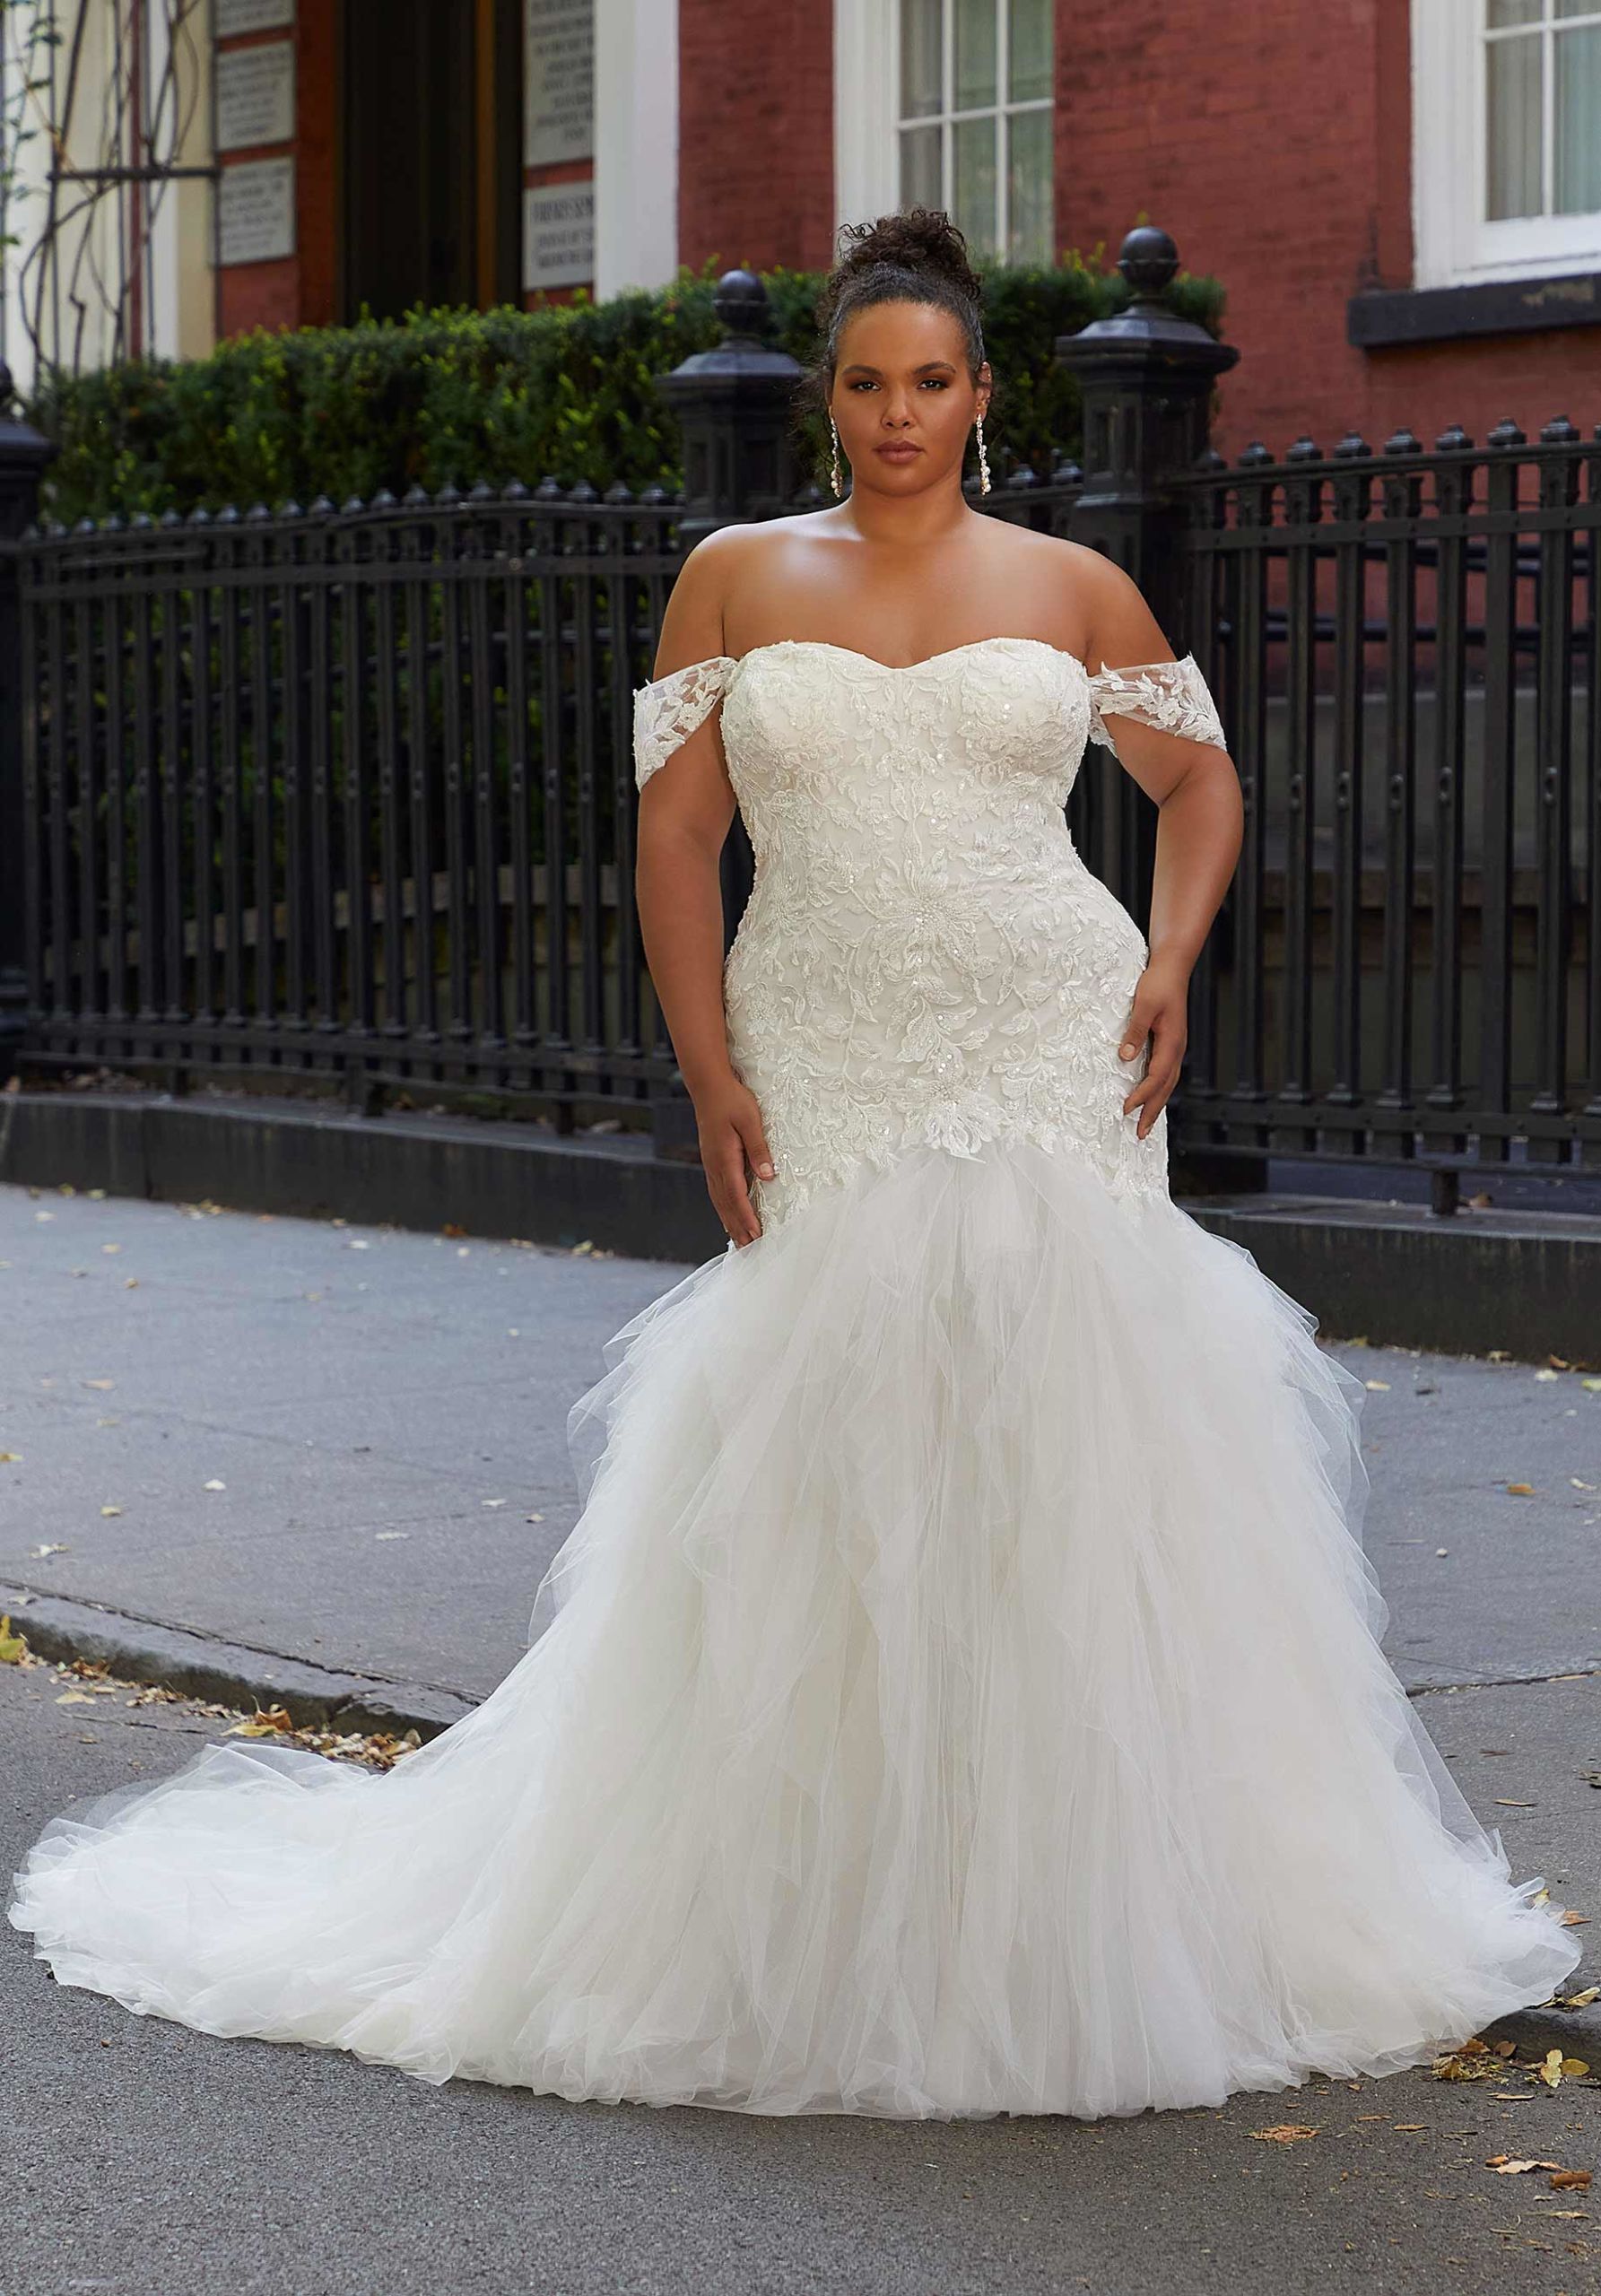 Mermaid is one of the most popular plus size wedding dress silhouettes